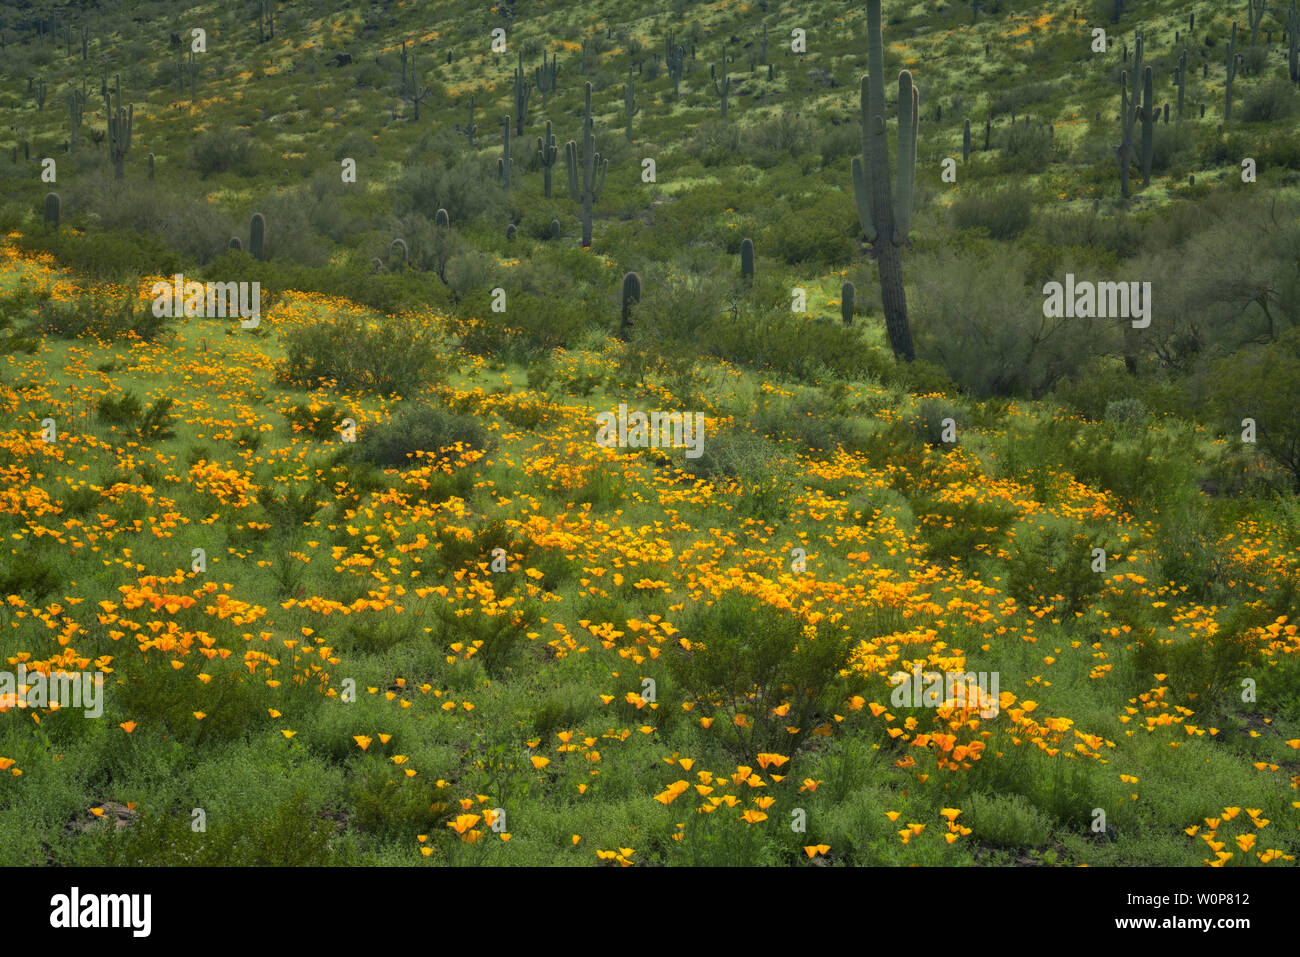 Winter El Nino rains create a Super Spring Bloom of Mexican poppies in southern Arizona’s Picacho Peak State Park. Stock Photo